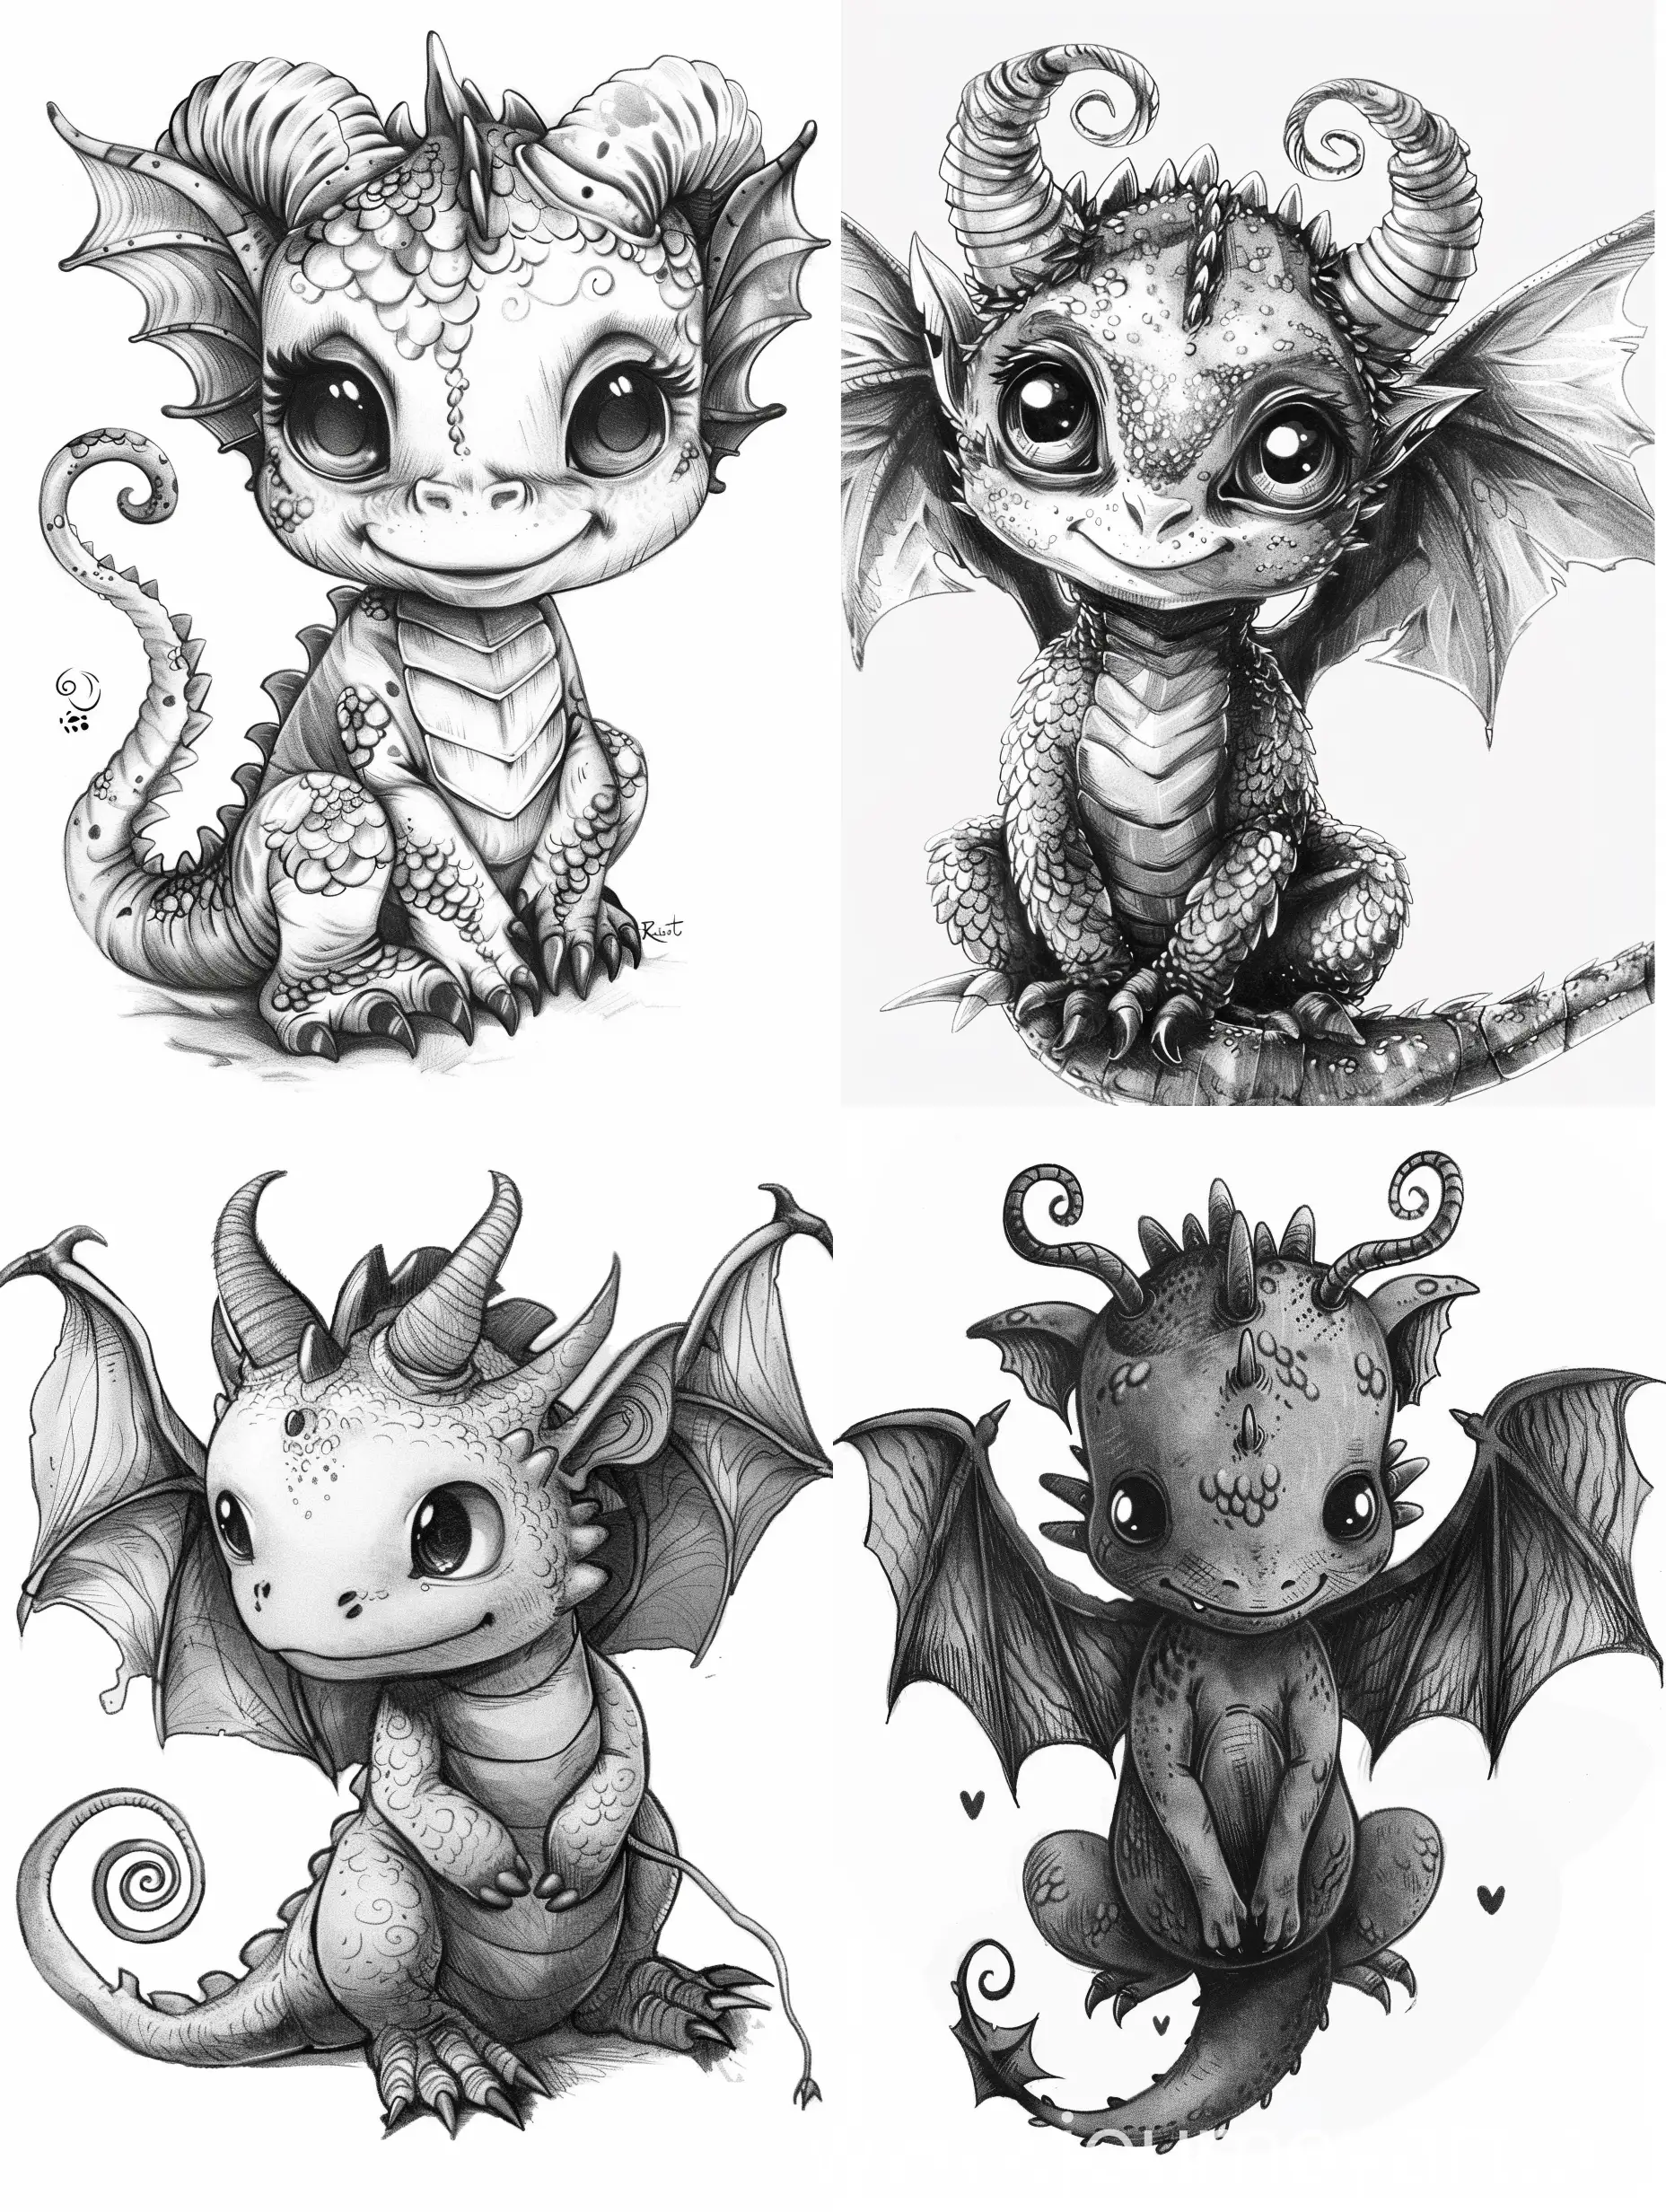 Adorable-6YearOld-Dragon-with-Tiny-Curled-Horns-in-Manga-Style